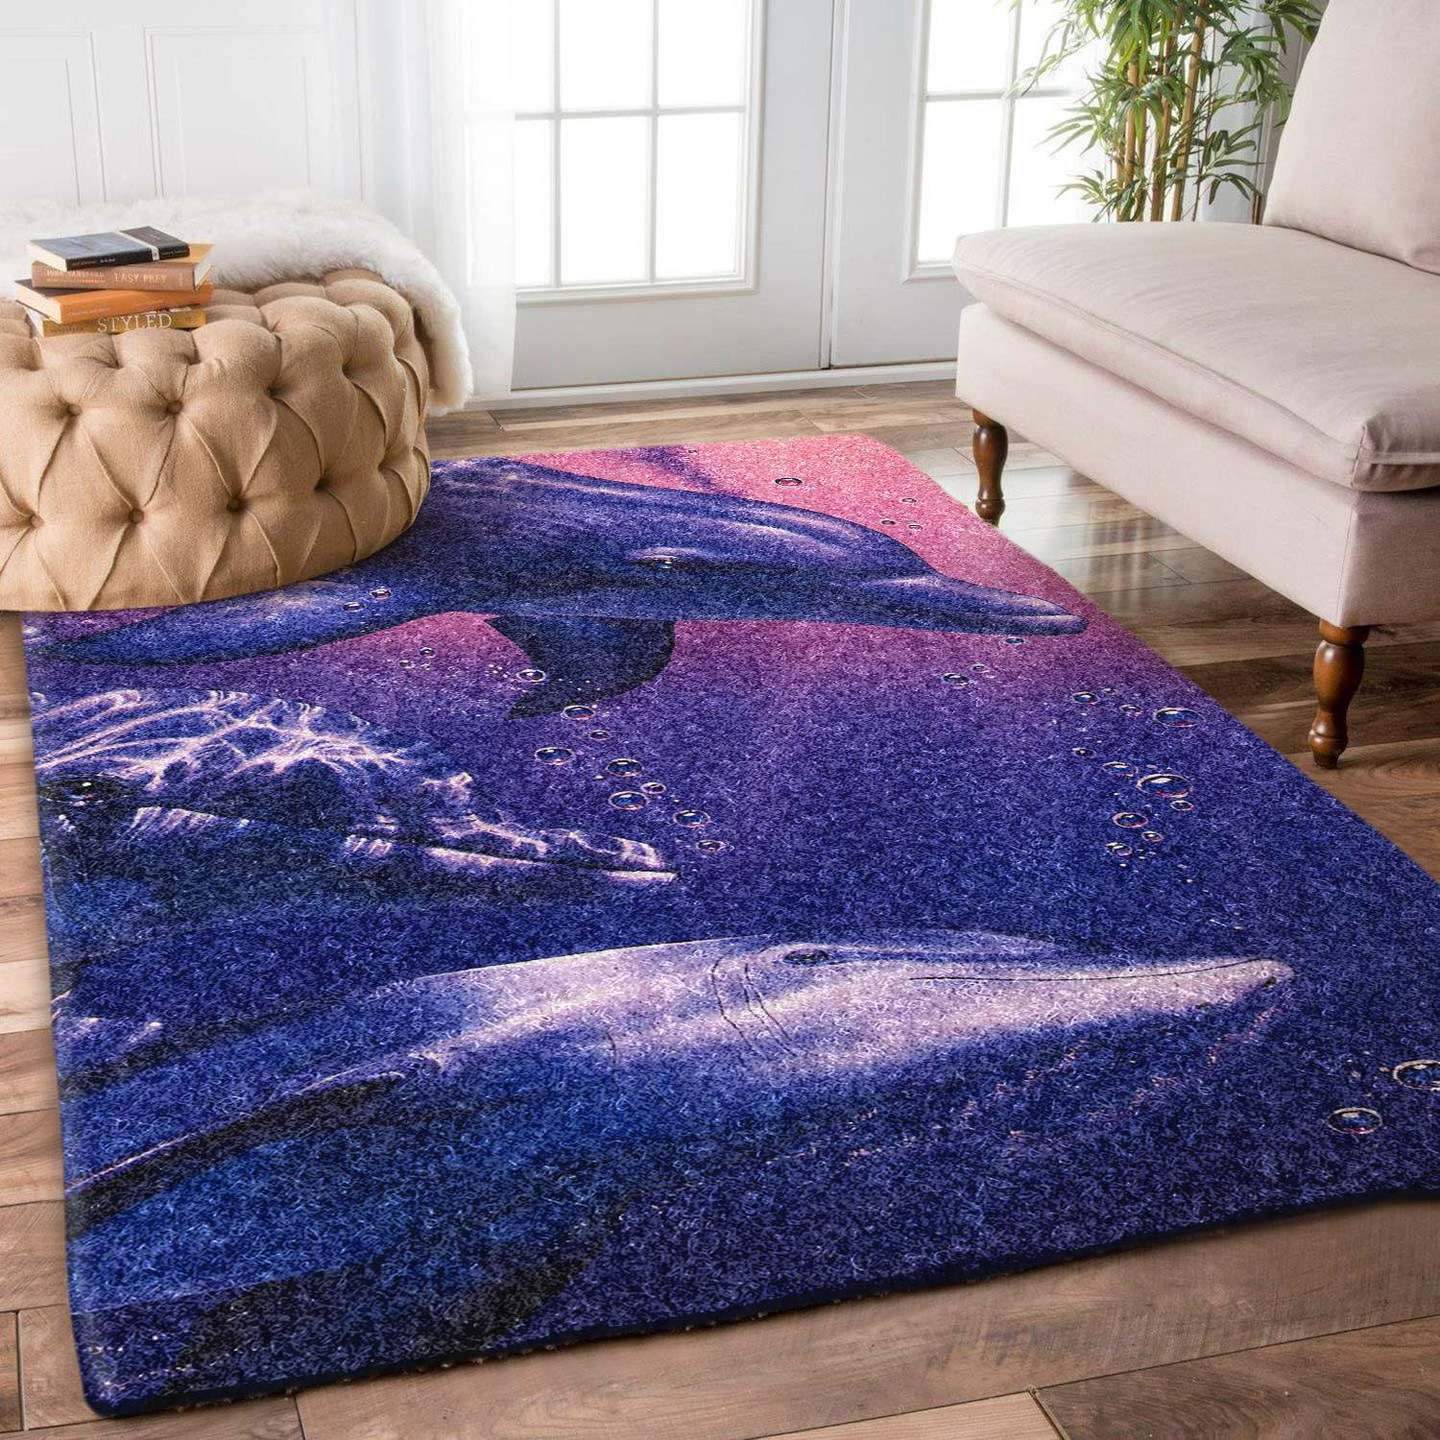 Dolphin Limited Edition Rug